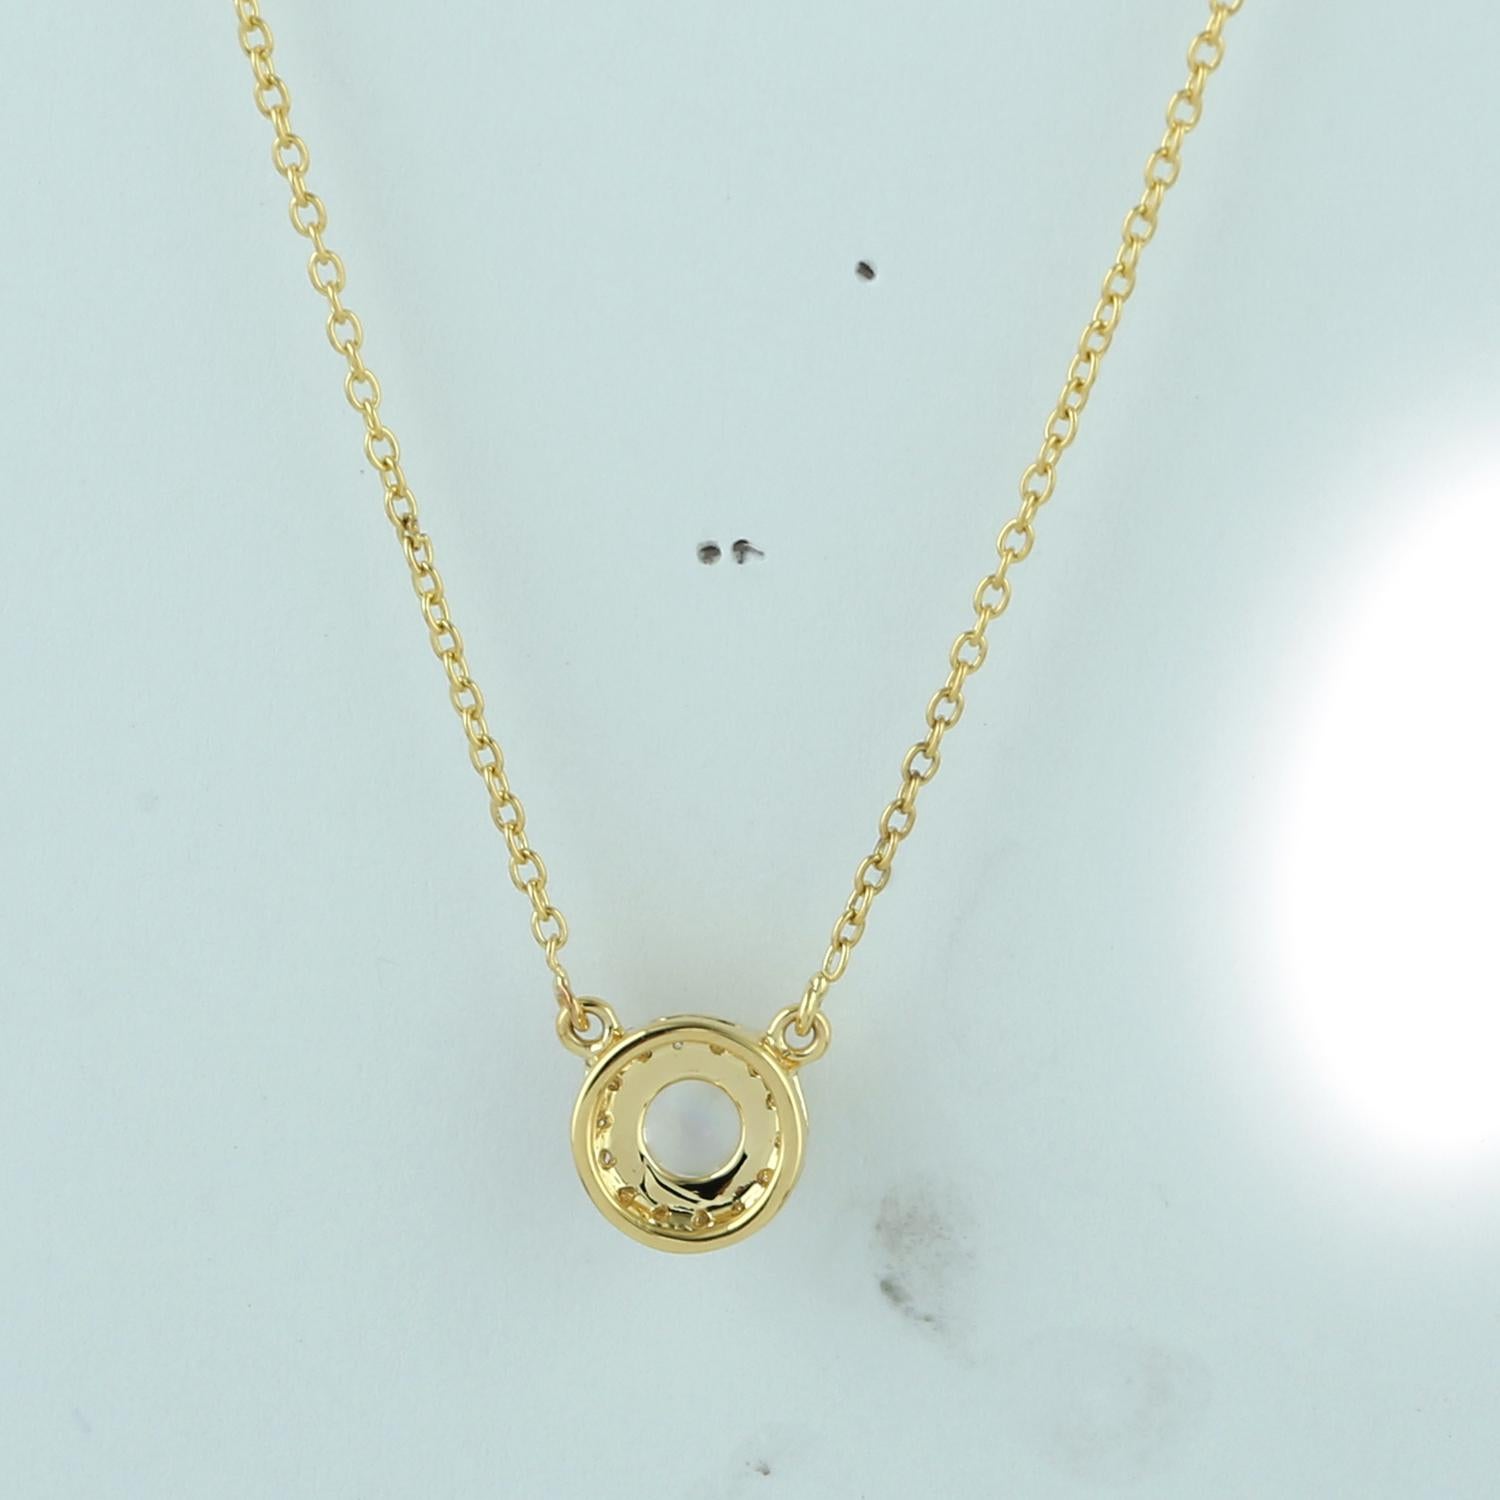 Contemporary Moonstone & Pave Diamond Pendant Chain Necklace Made In 18k Yellow Gold For Sale